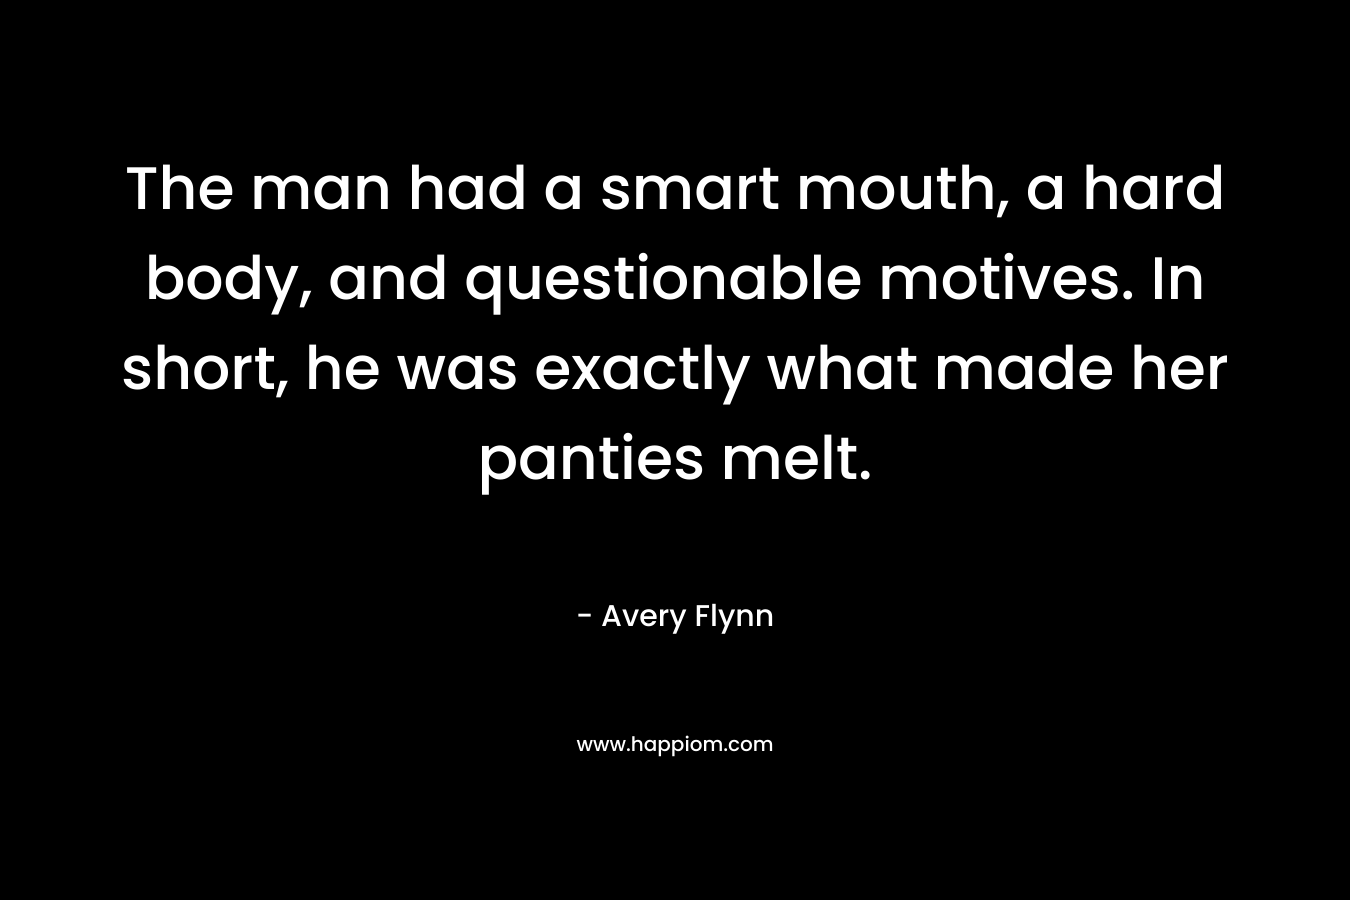 The man had a smart mouth, a hard body, and questionable motives. In short, he was exactly what made her panties melt. – Avery Flynn